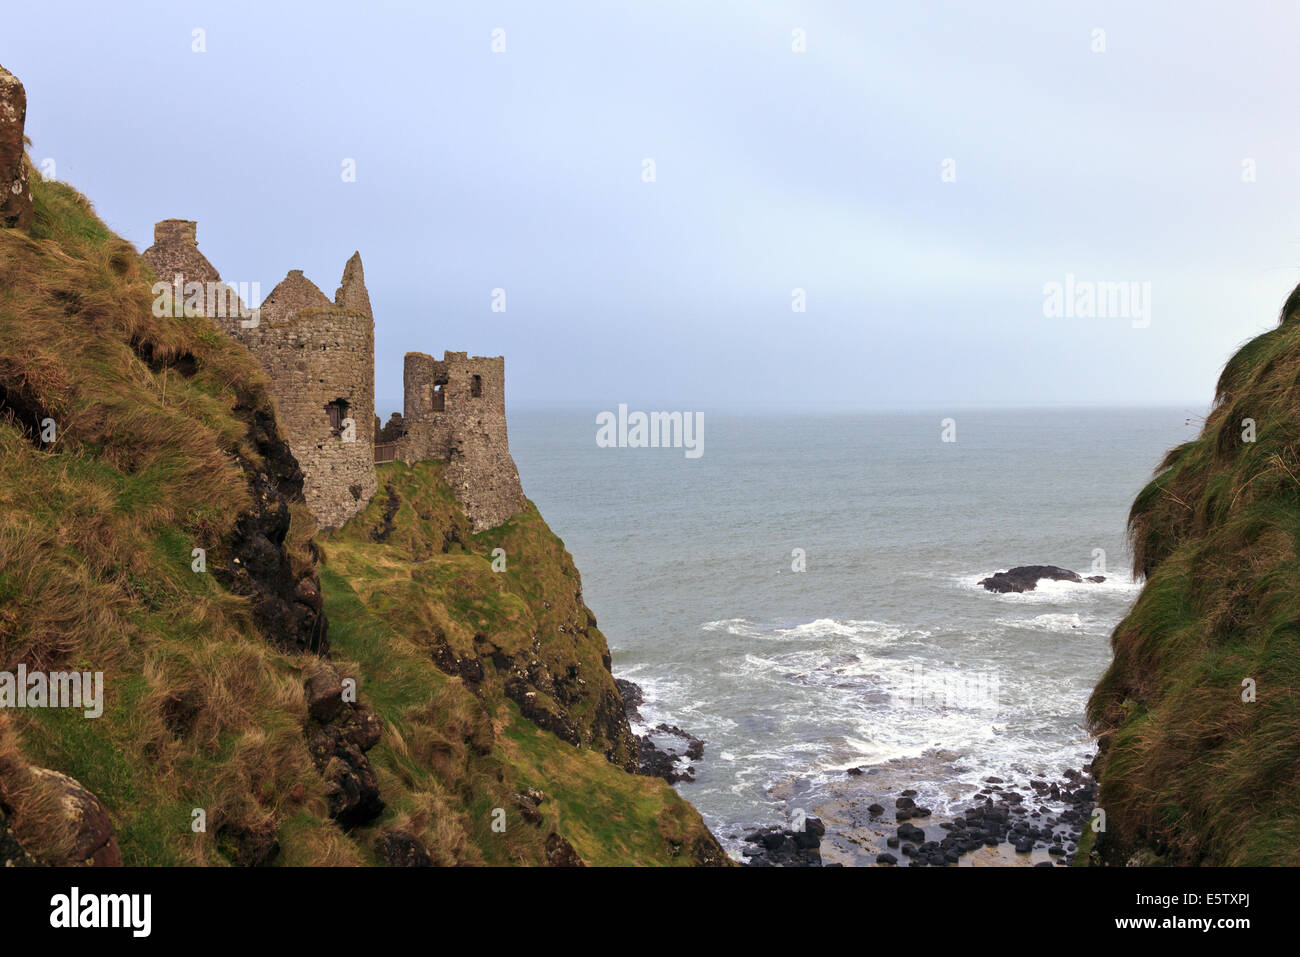 Dunluce castle, a ruined medieval castle in Northern Ireland Stock Photo